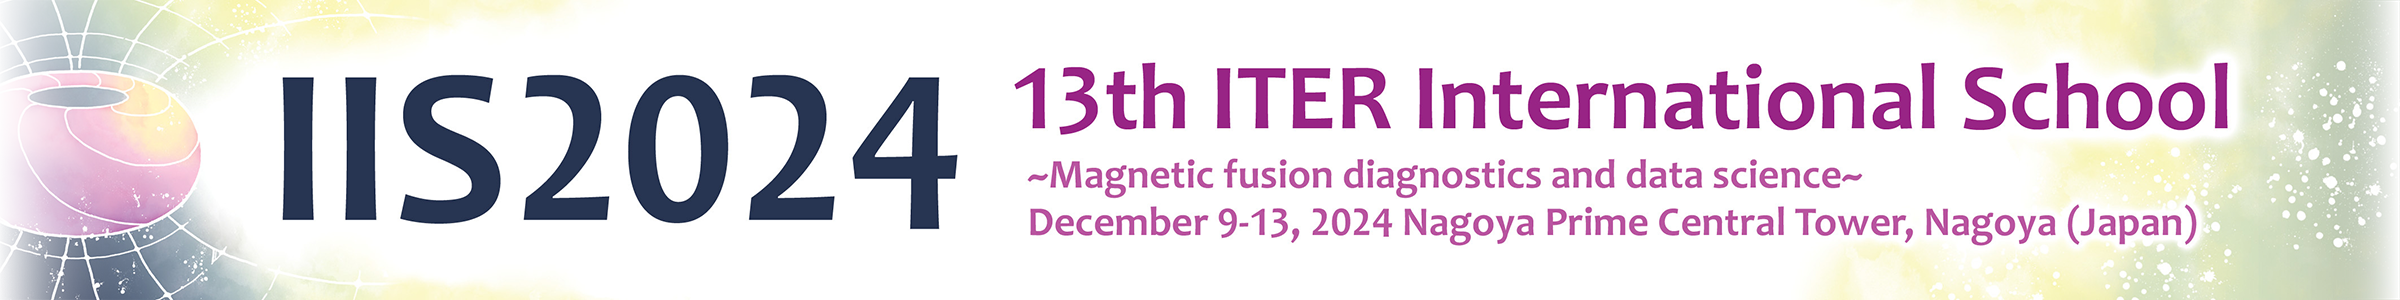 IIS2024 - 13th ITER International School ~Magnetic fusion diagnostics and Data science~